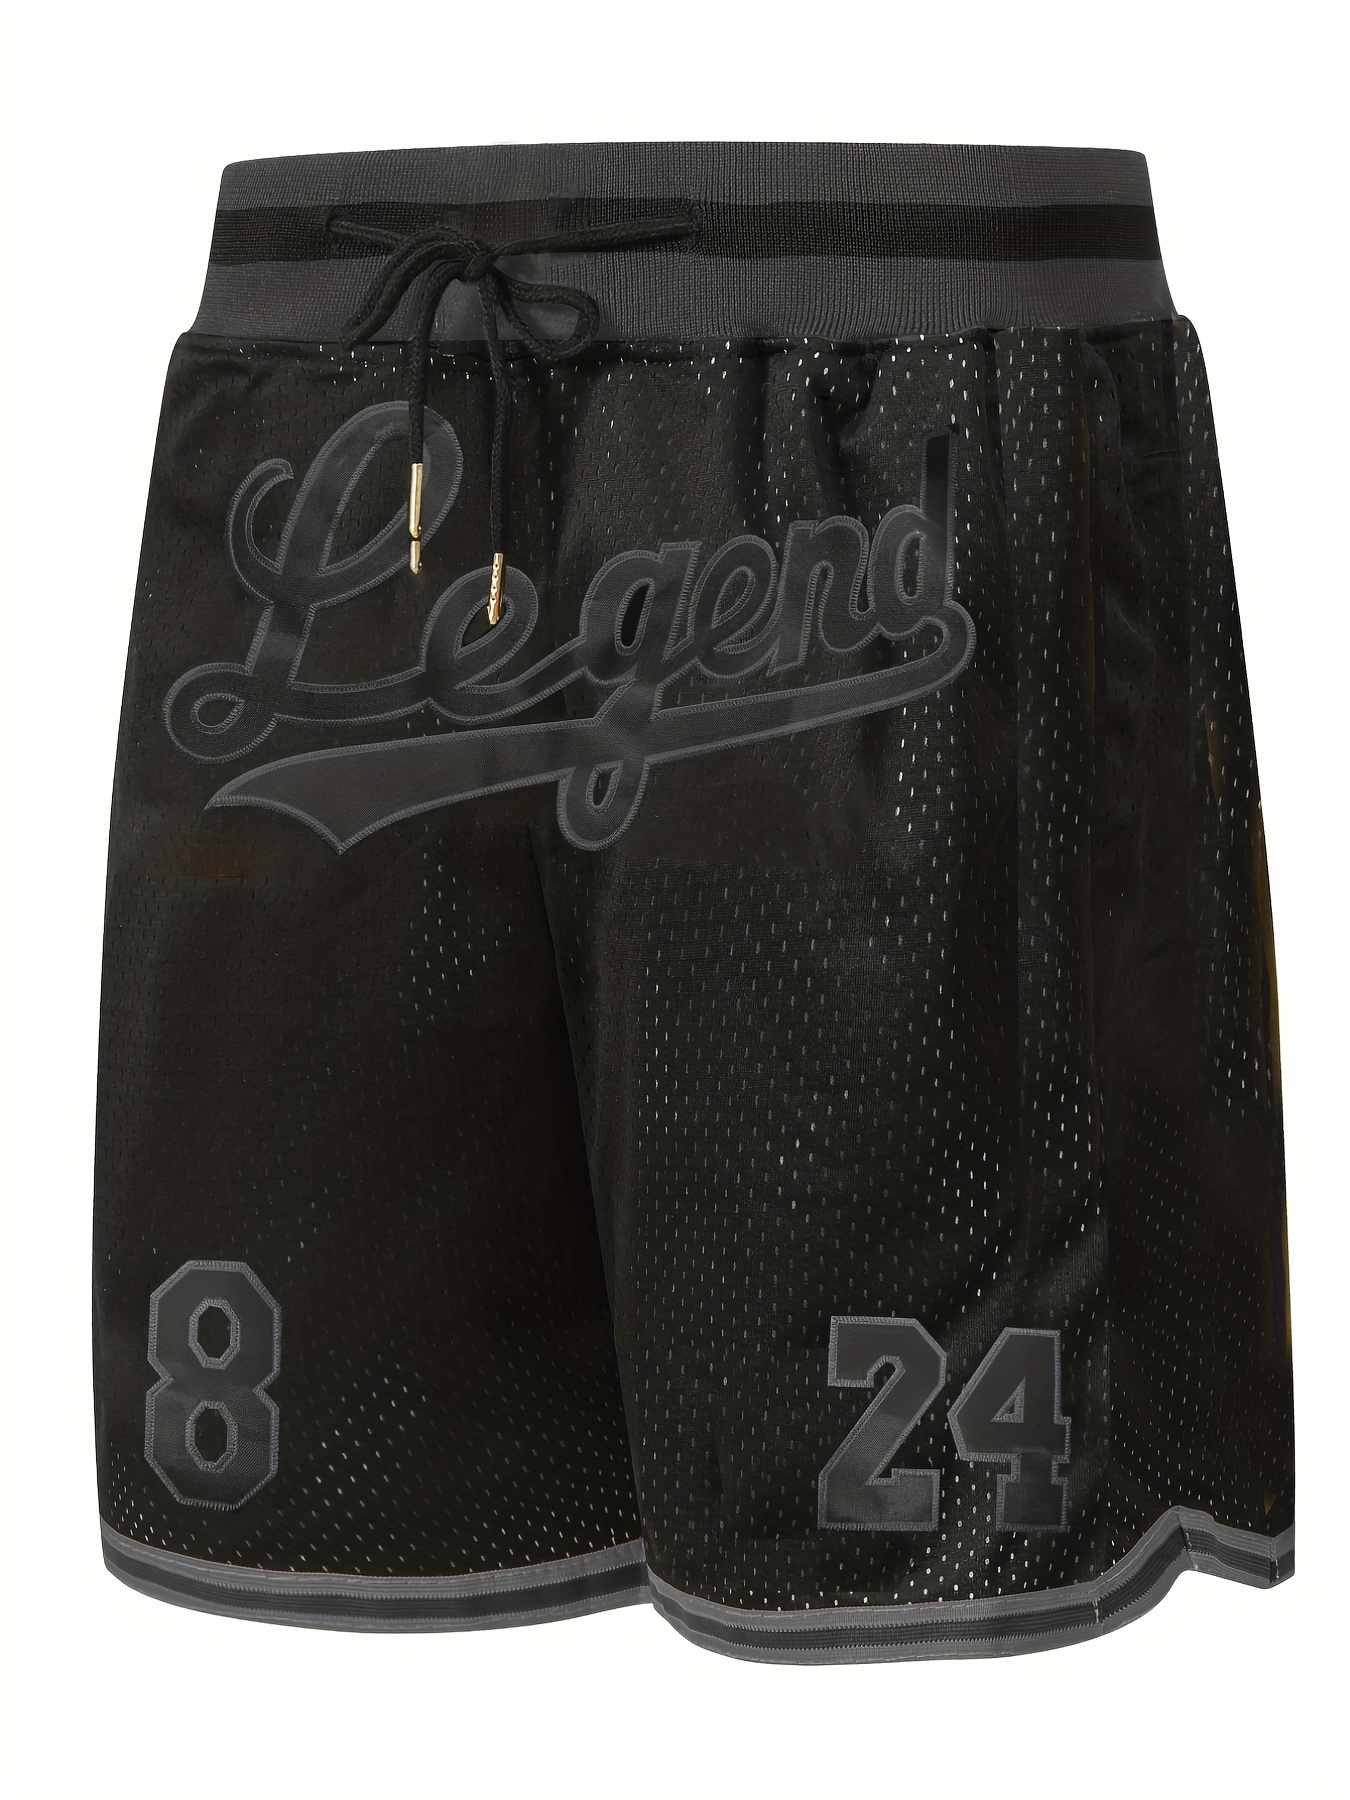 Mens Shorts,Men Athletic Basketball Shorts Retro with Pockets Gym Workout  Mesh Quick Dry Black at  Men's Clothing store